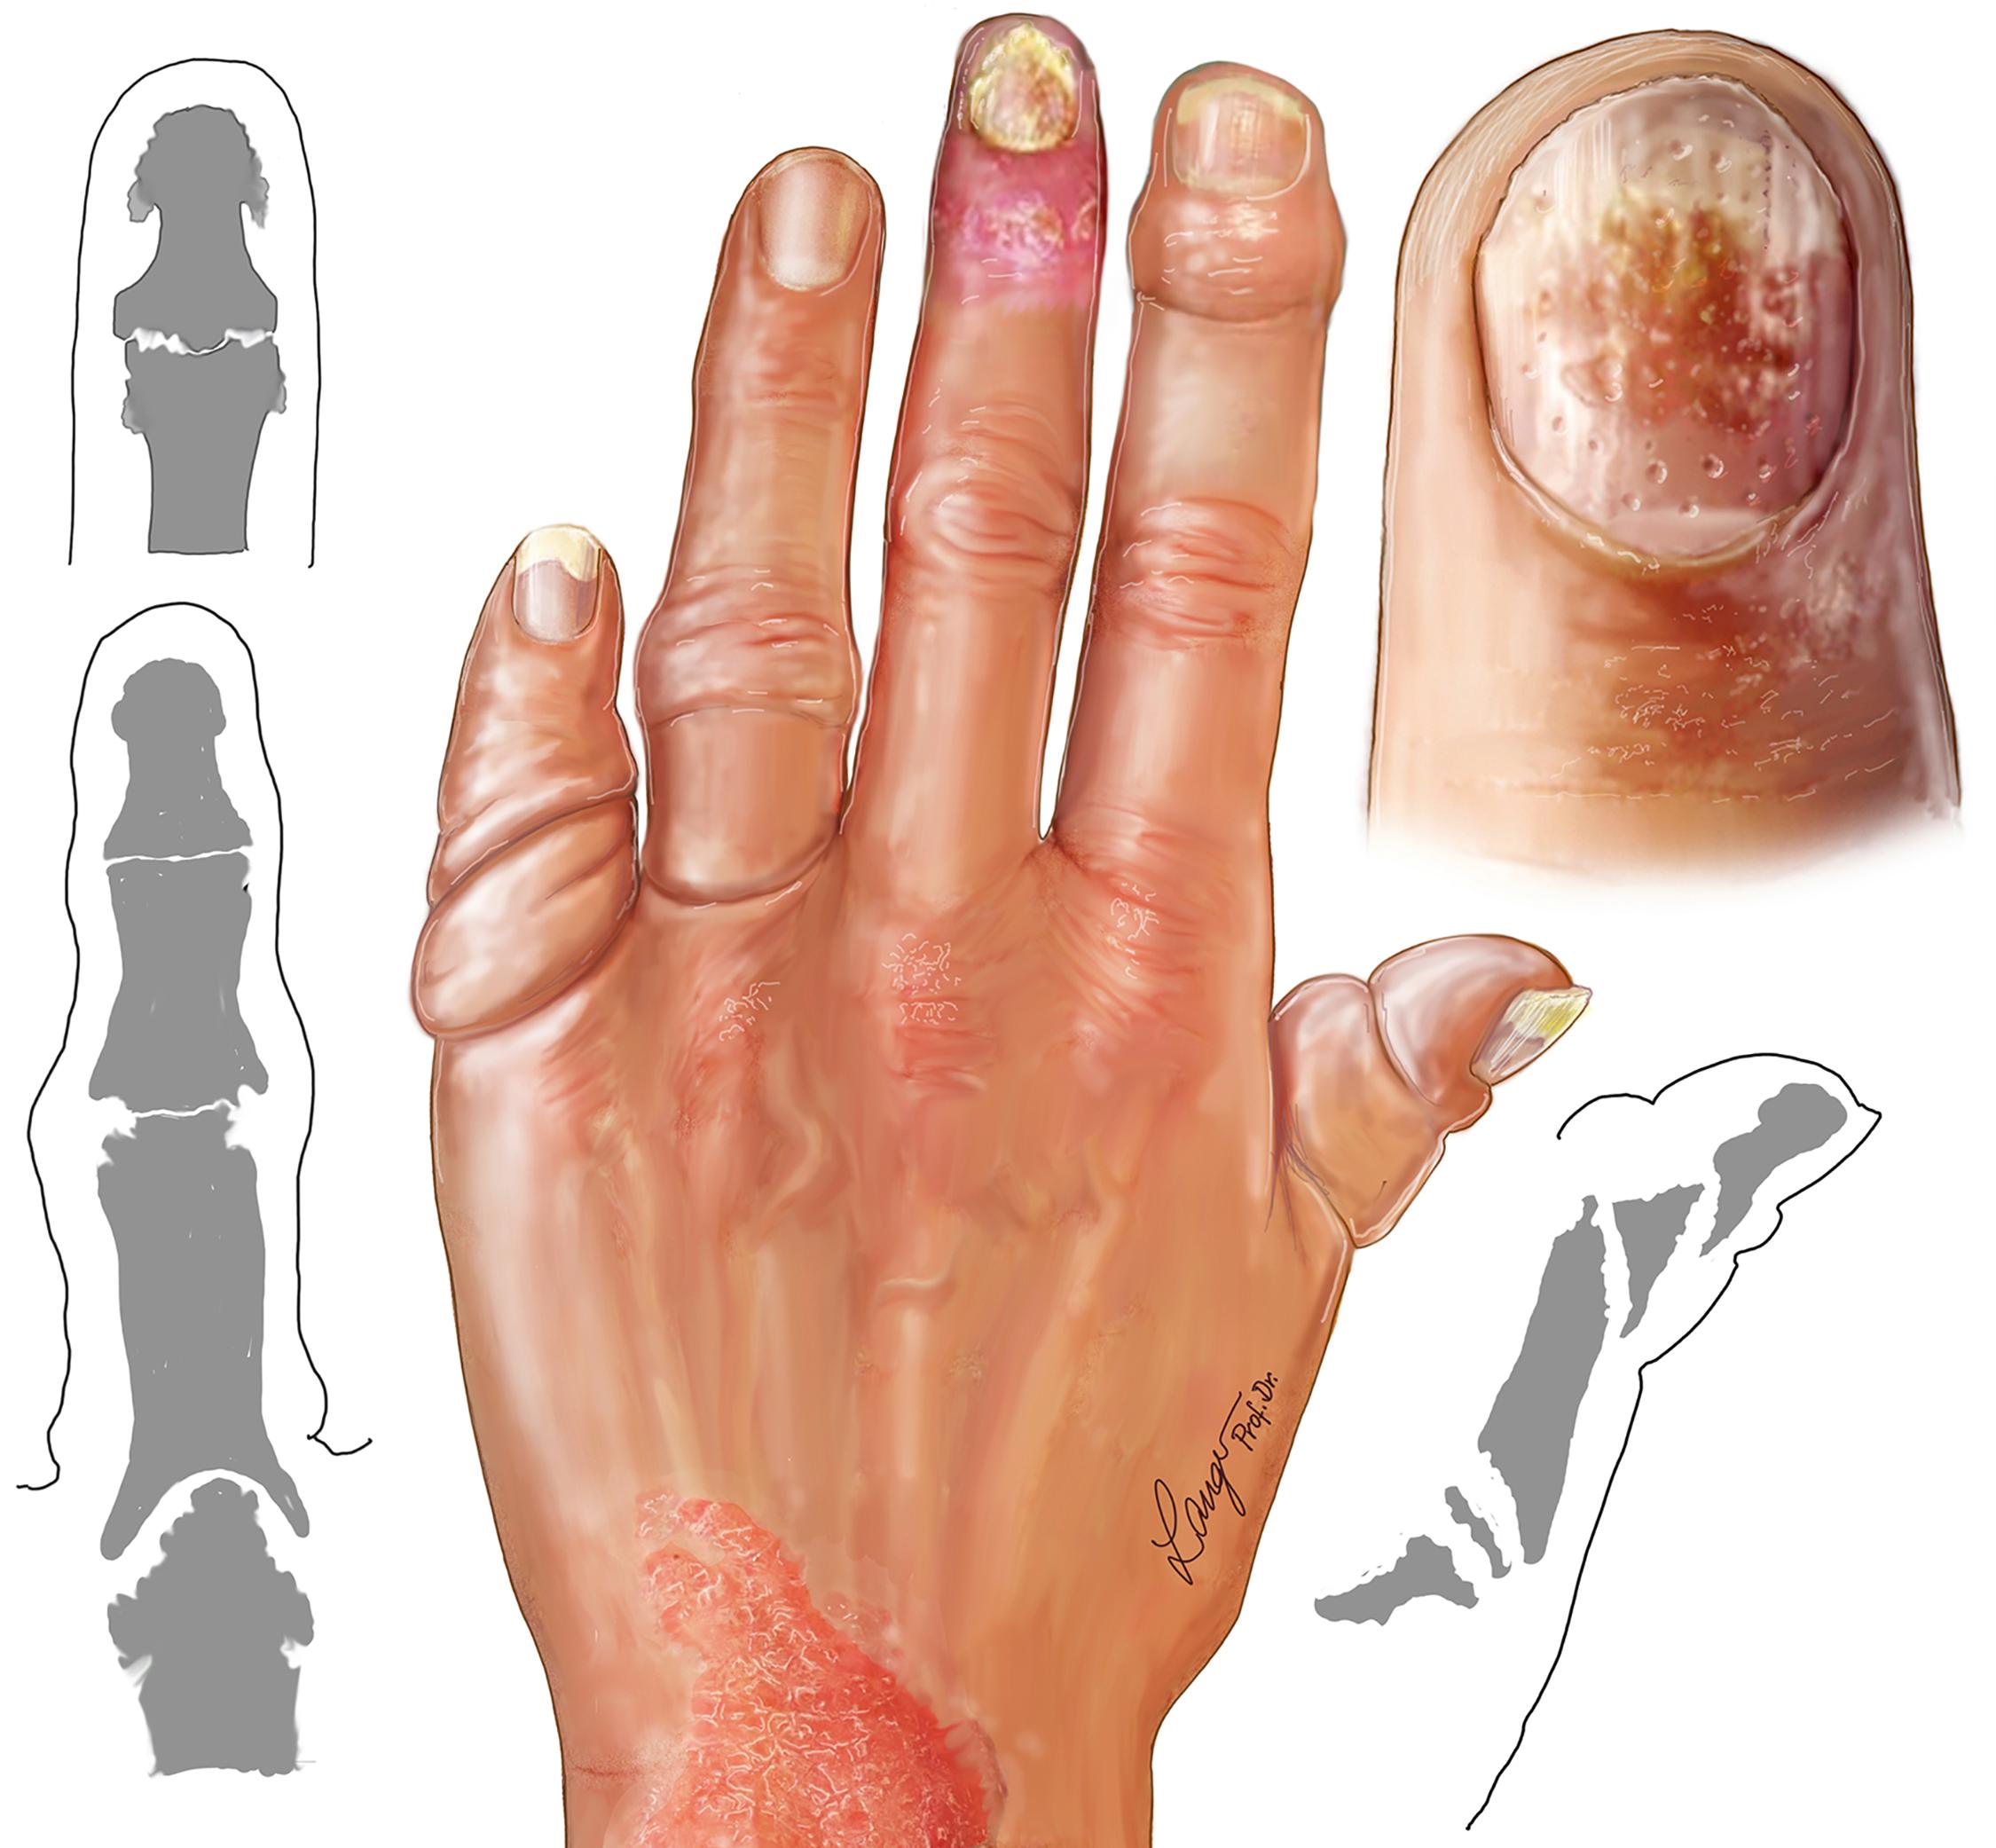 Fig. 55.1, Typical appearance of a psoriatic hand that includes the psoriatic skin rush, pitting nail deformity, joint destruction with significant bone loss (cup-in-pencil deformity), and shortening of the fingers (opera glass deformity).